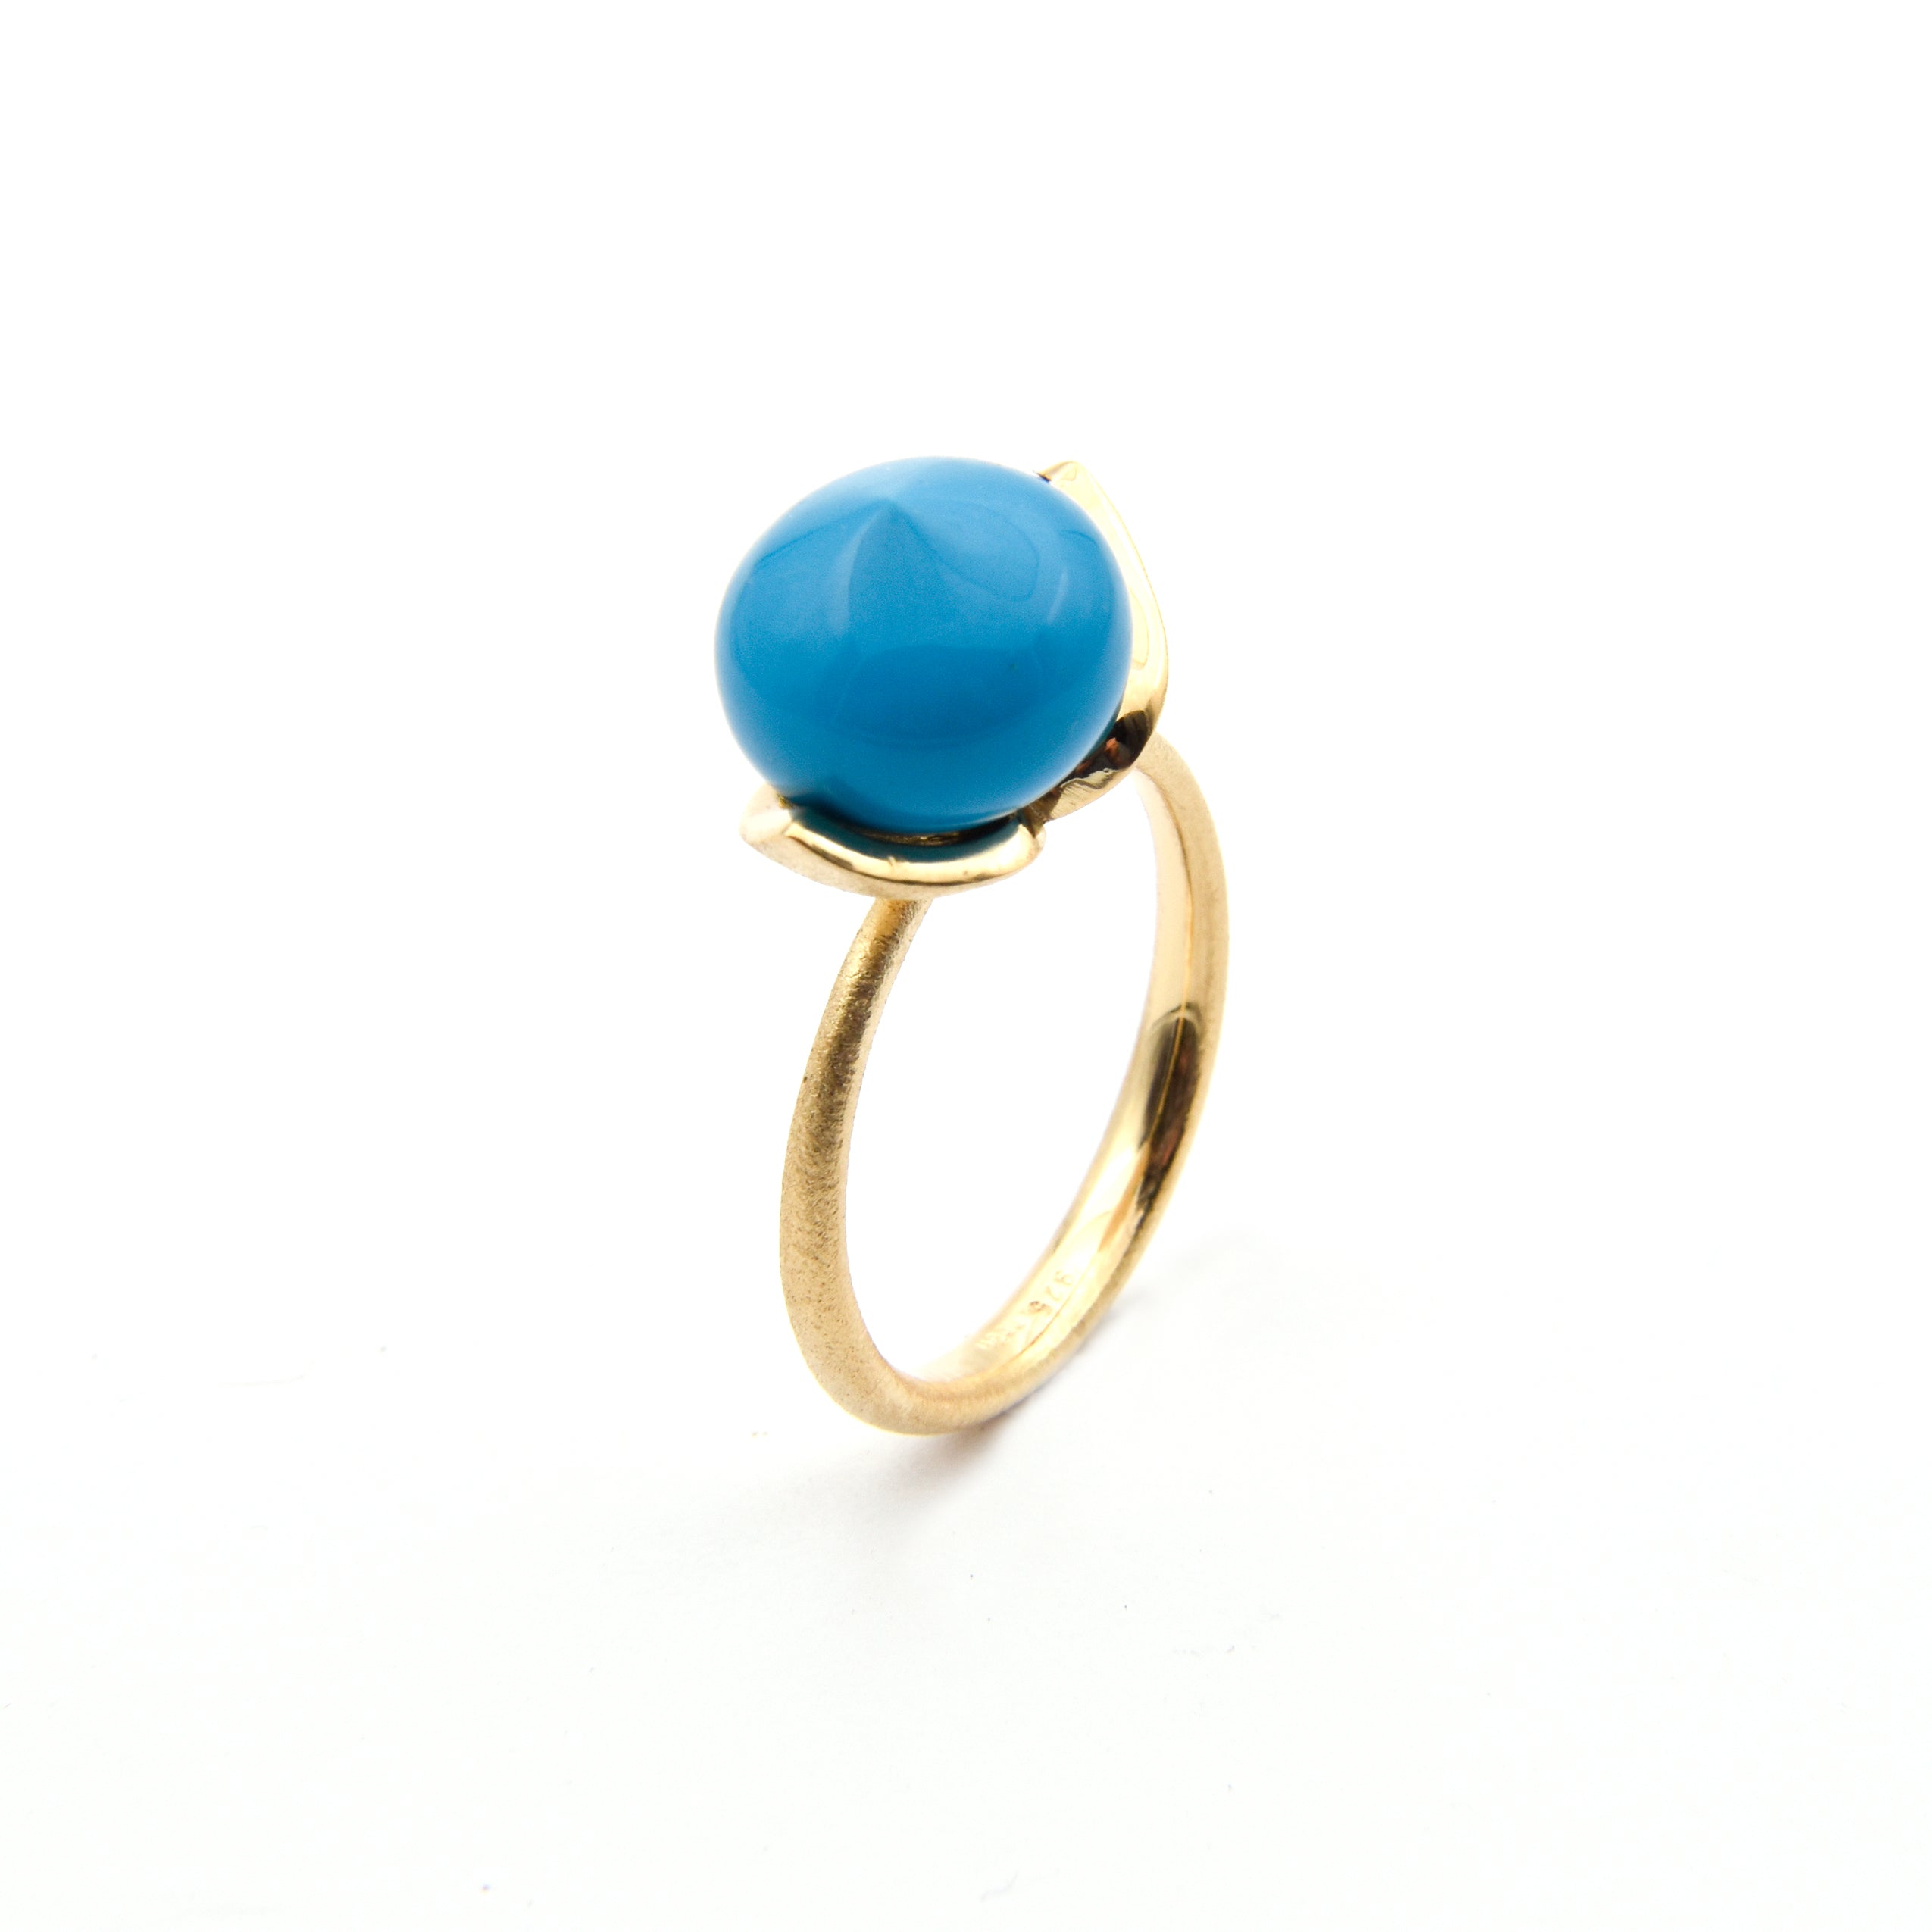 Dolce ring "medium" with turquoise rec. 925/-